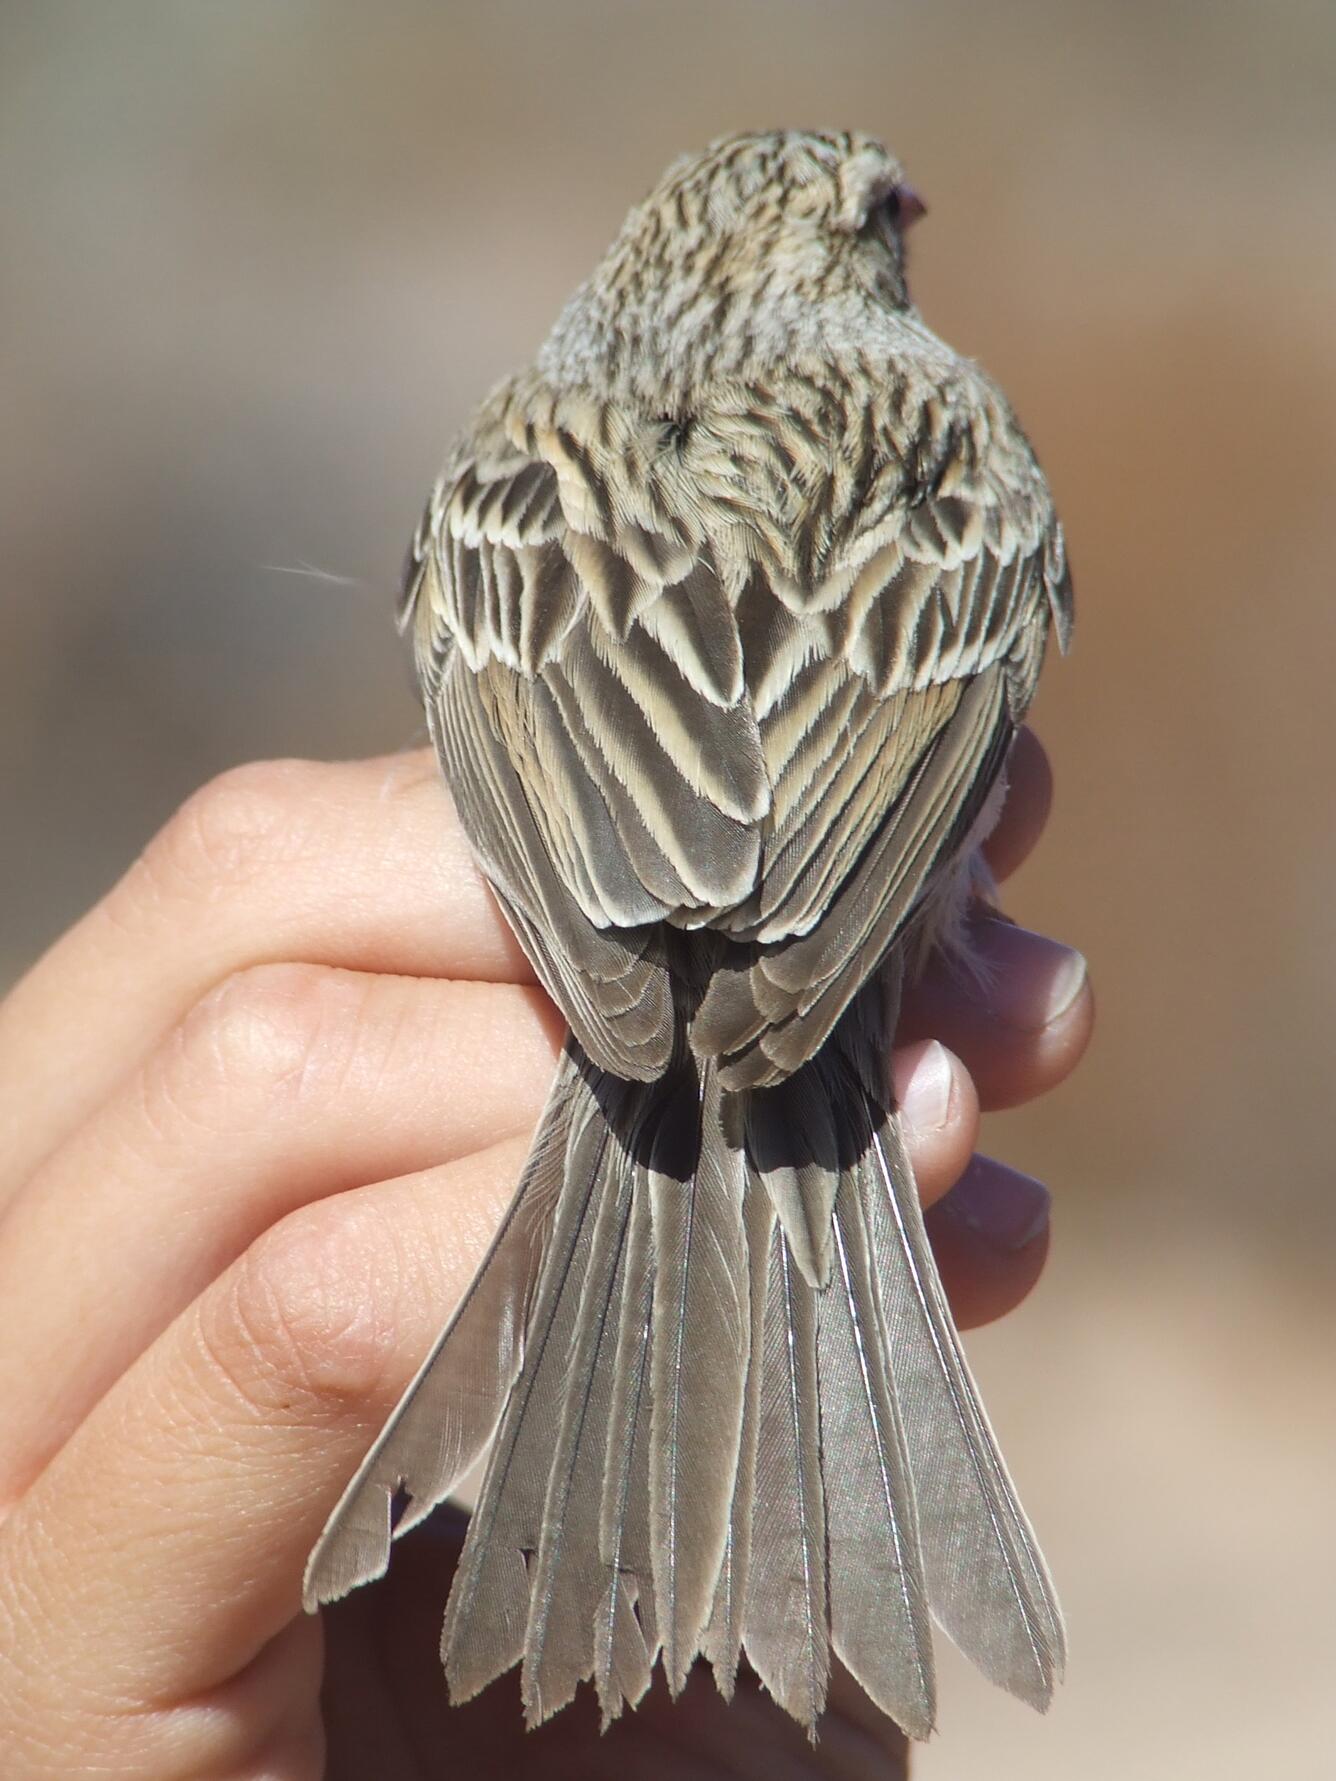 Image: Brewer's Sparrow in Hand